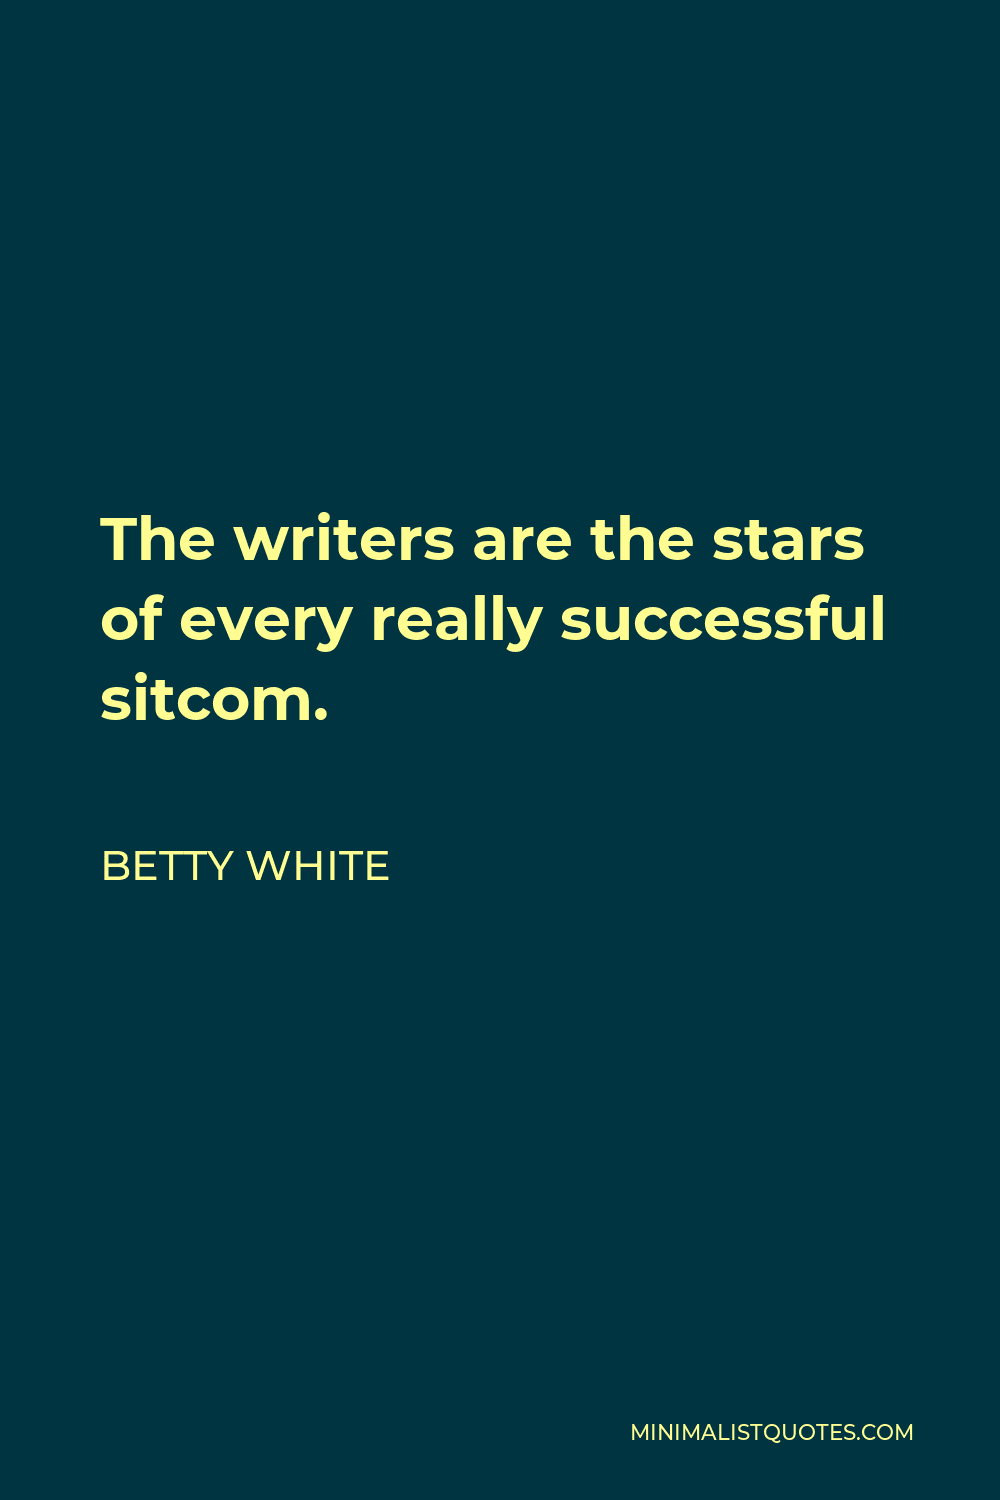 Betty White Quote - The writers are the stars of every really successful sitcom.